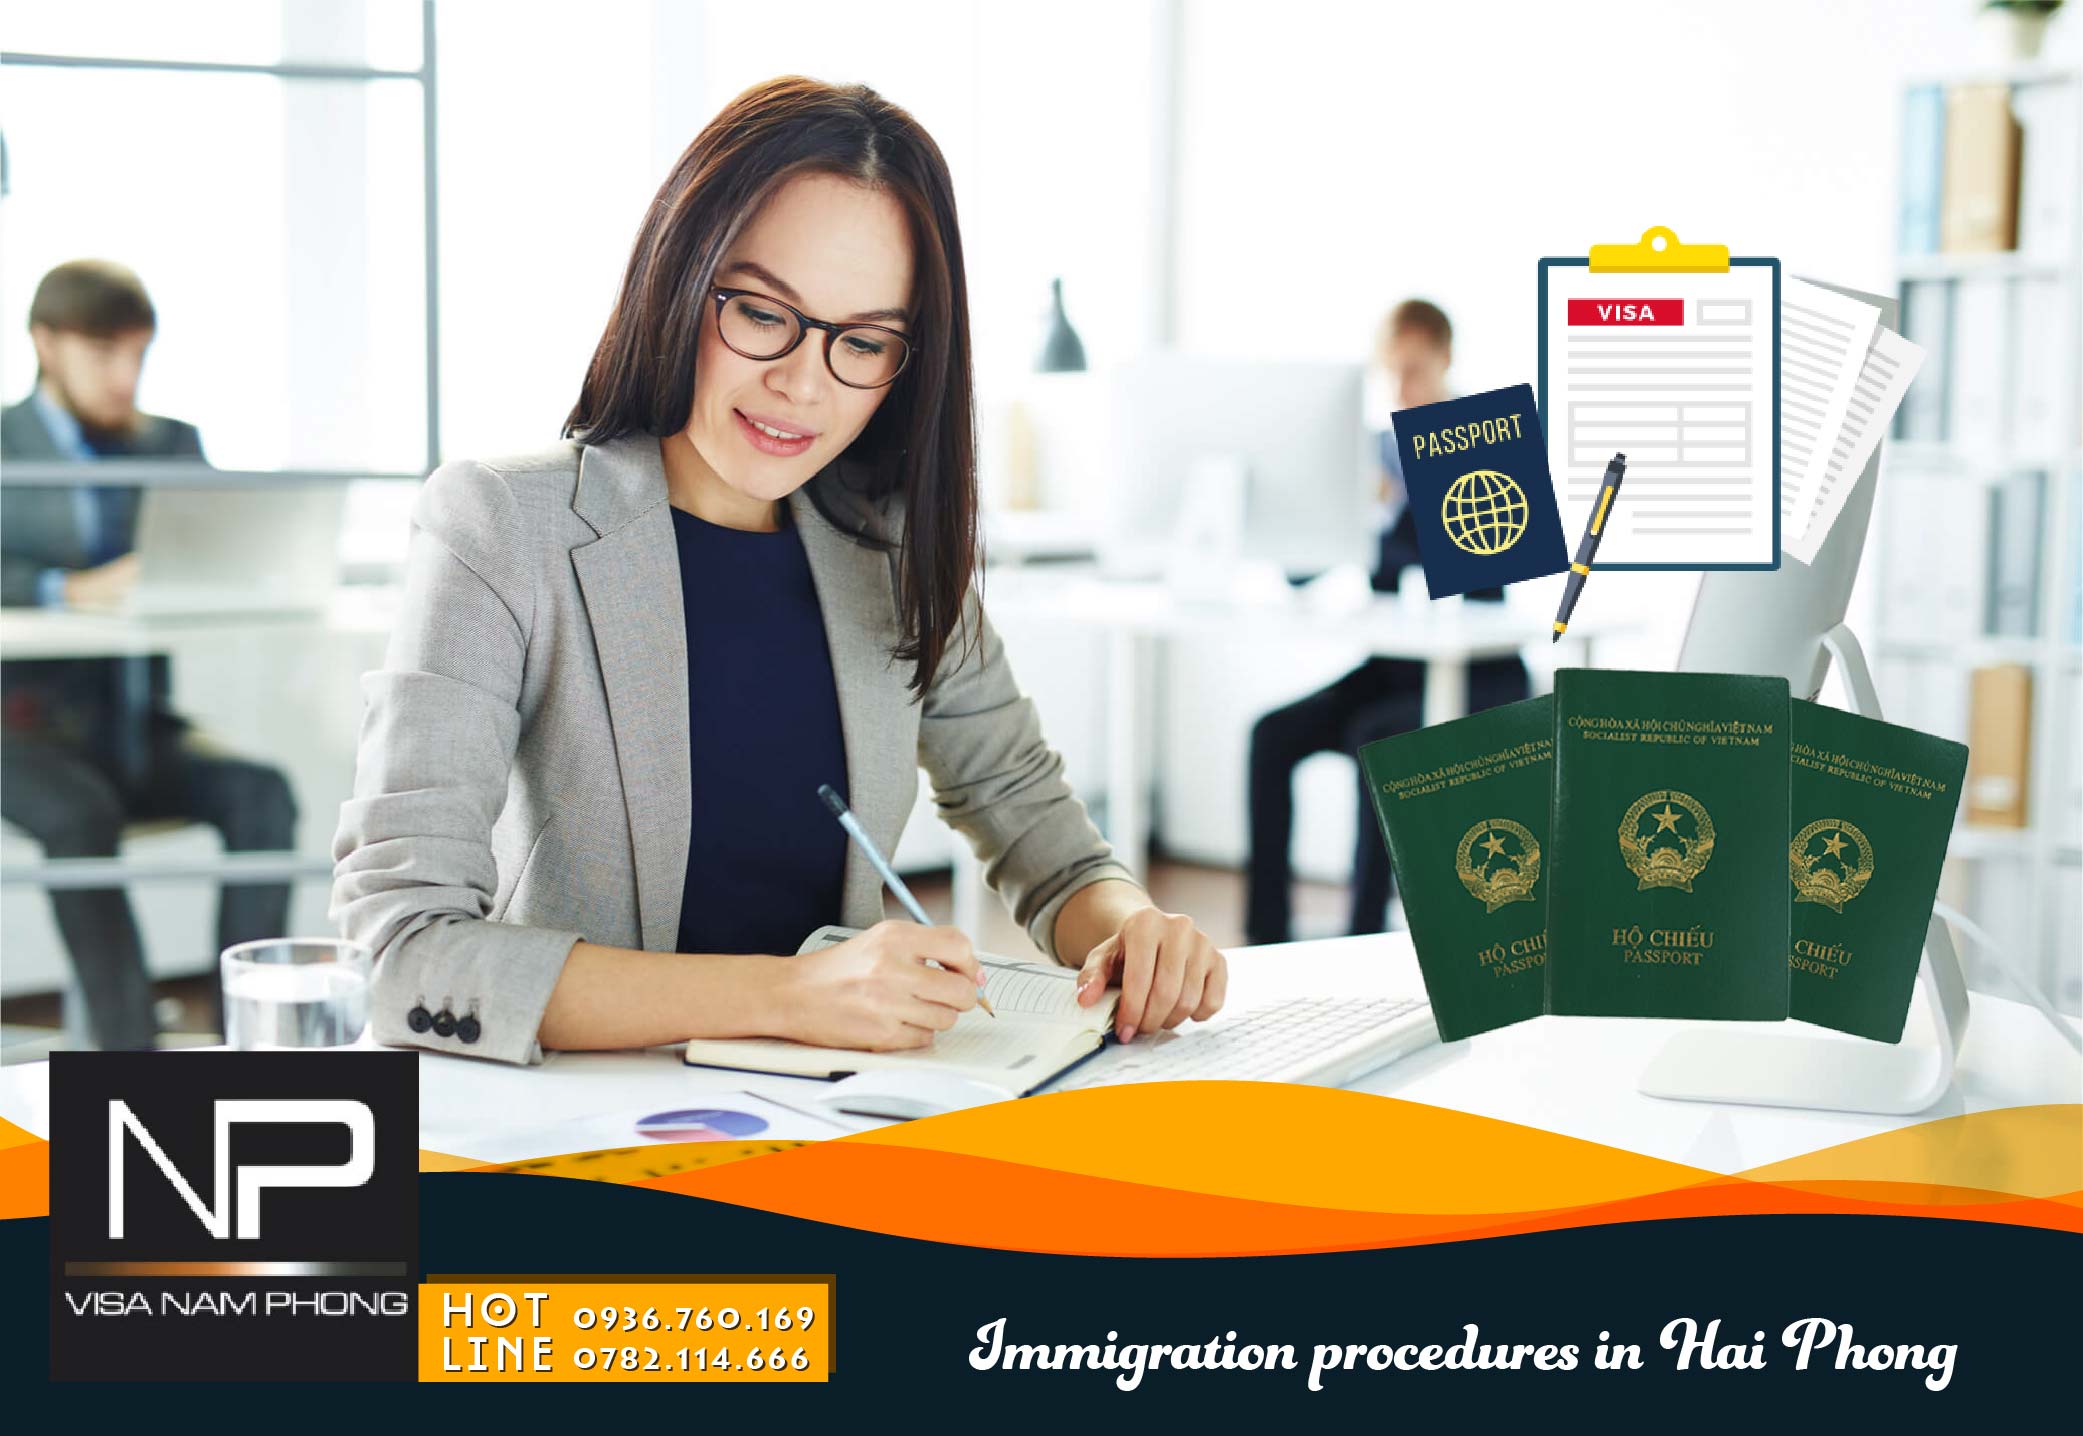 Immigration procedures in Hai Phong